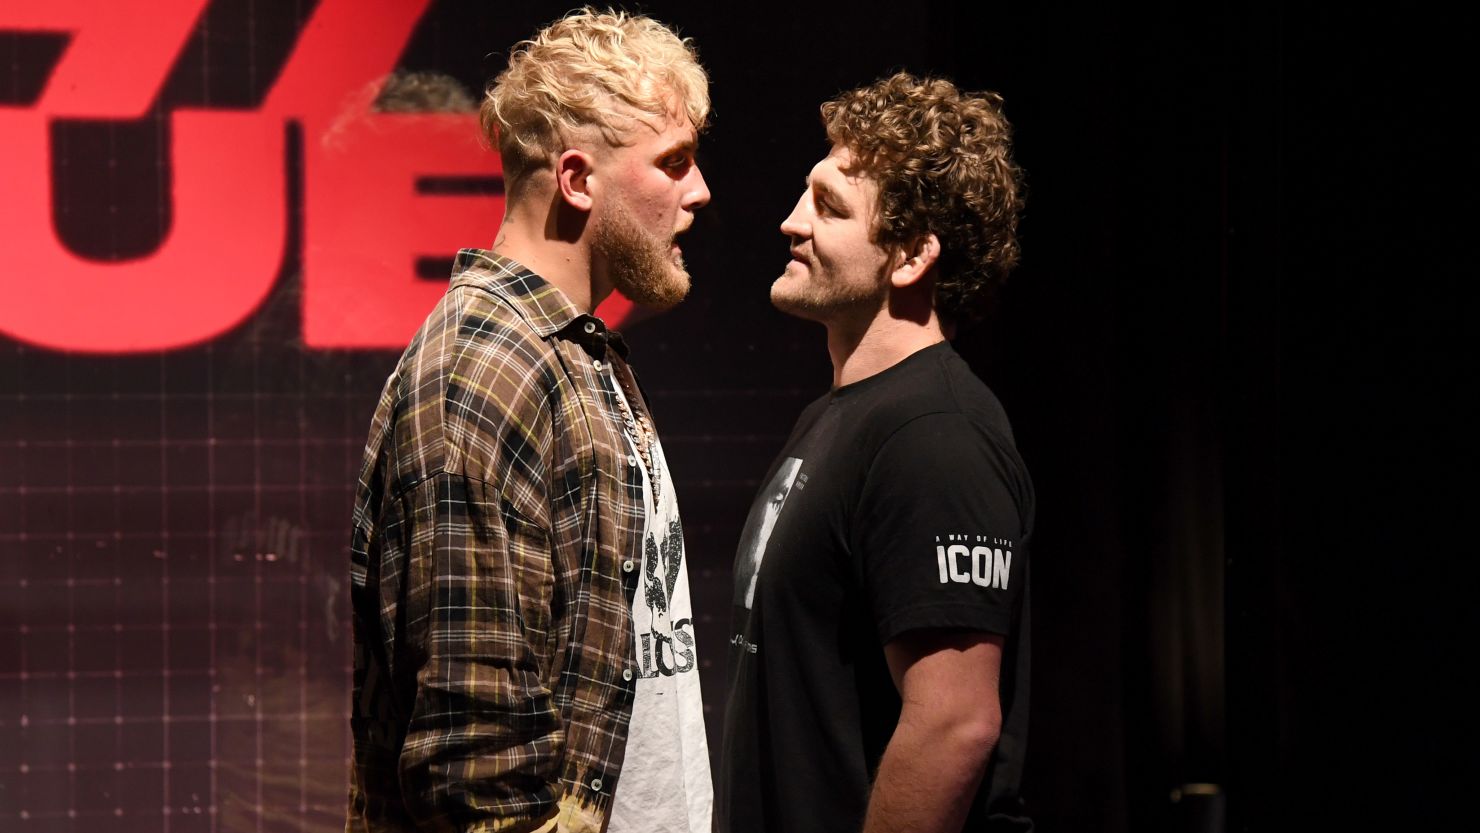 Jake Paul and Ben Askren face off during a news conference for Triller Fight Club's inaugural 2021 boxing event at The Venetian Las Vegas on March 26 in Las Vegas, Nevada.